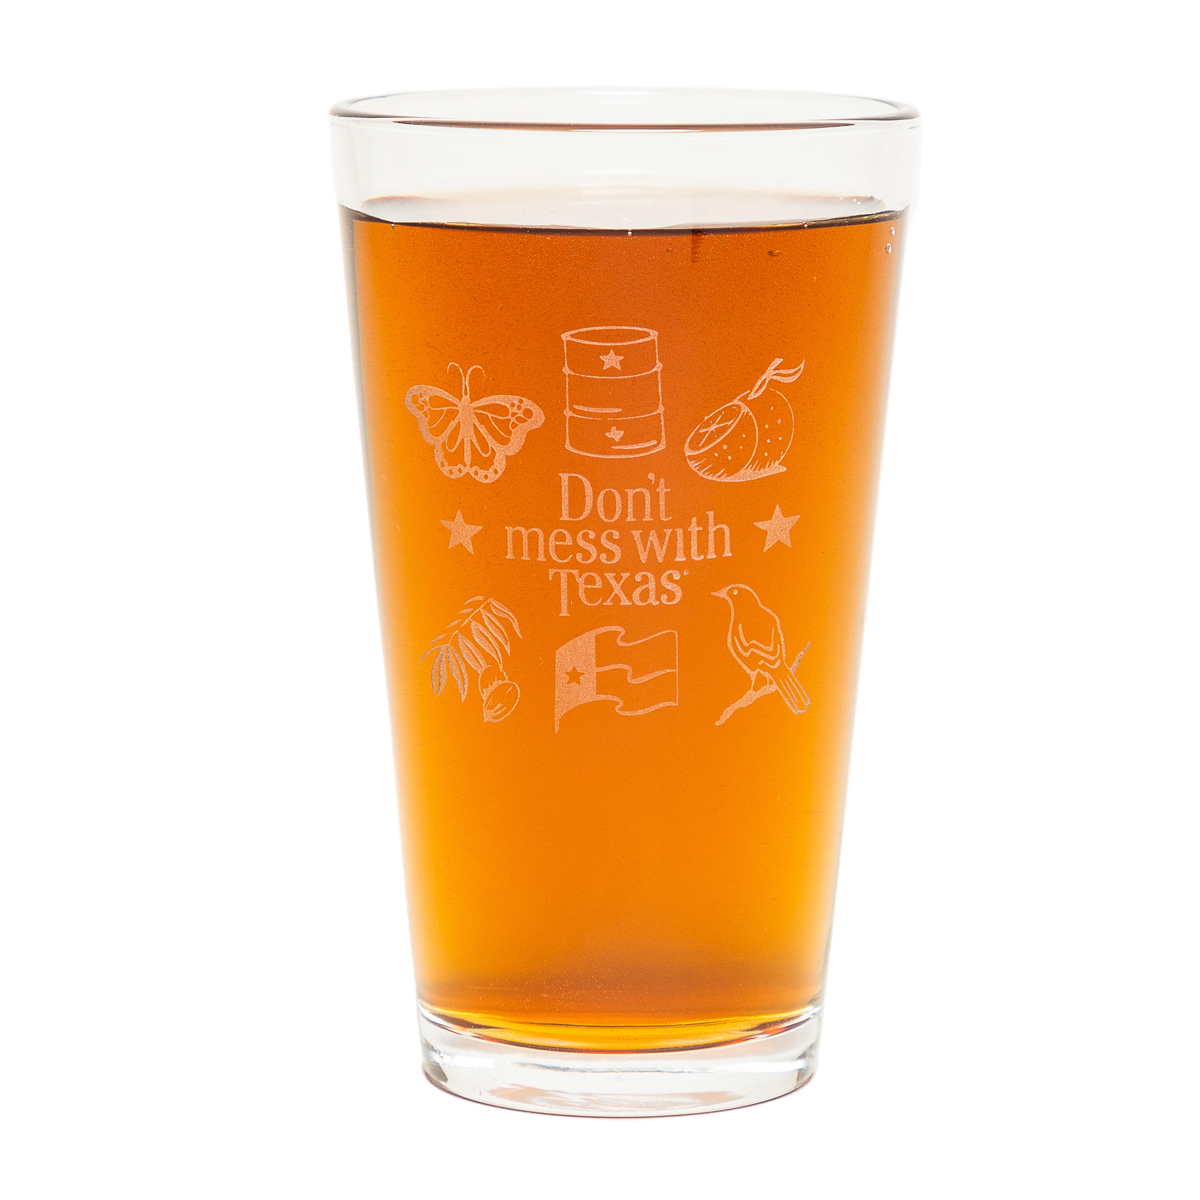 Don't mess with Texas Pint Glass, Texas State Icons